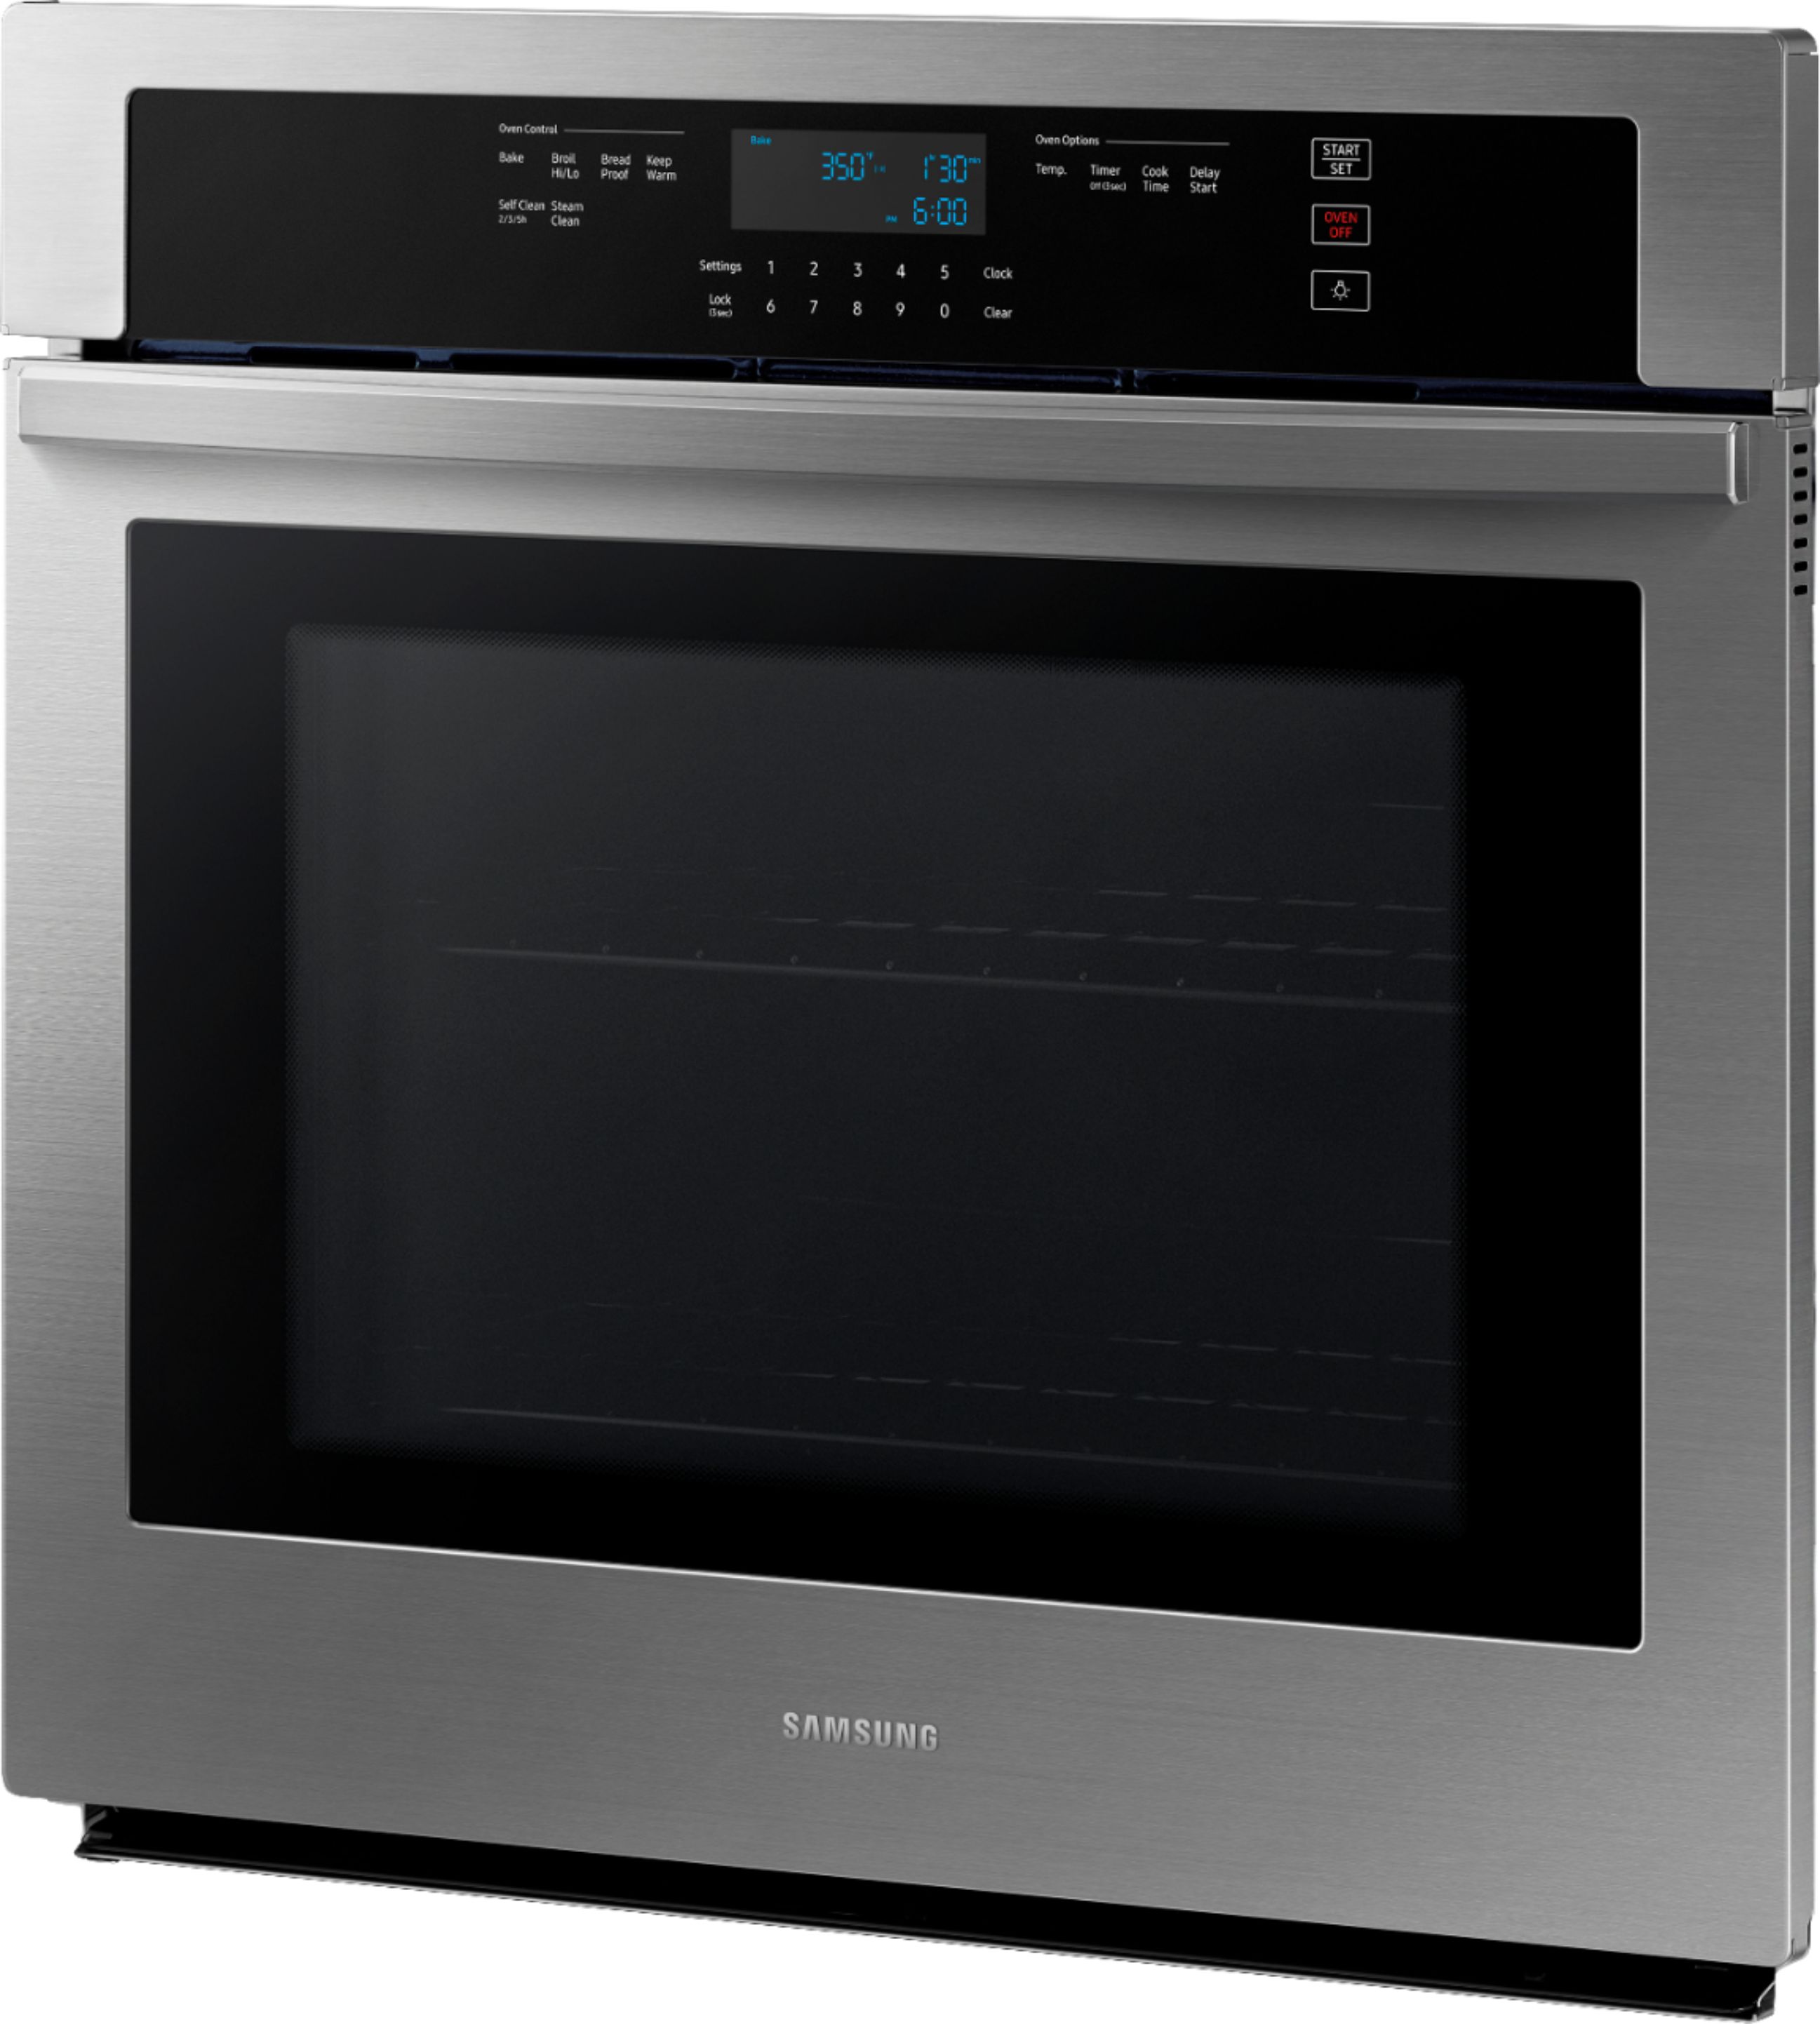 Samsung 30" Built-In Single Electric Wall Oven Black stainless steel Black Stainless Steel Built In Oven